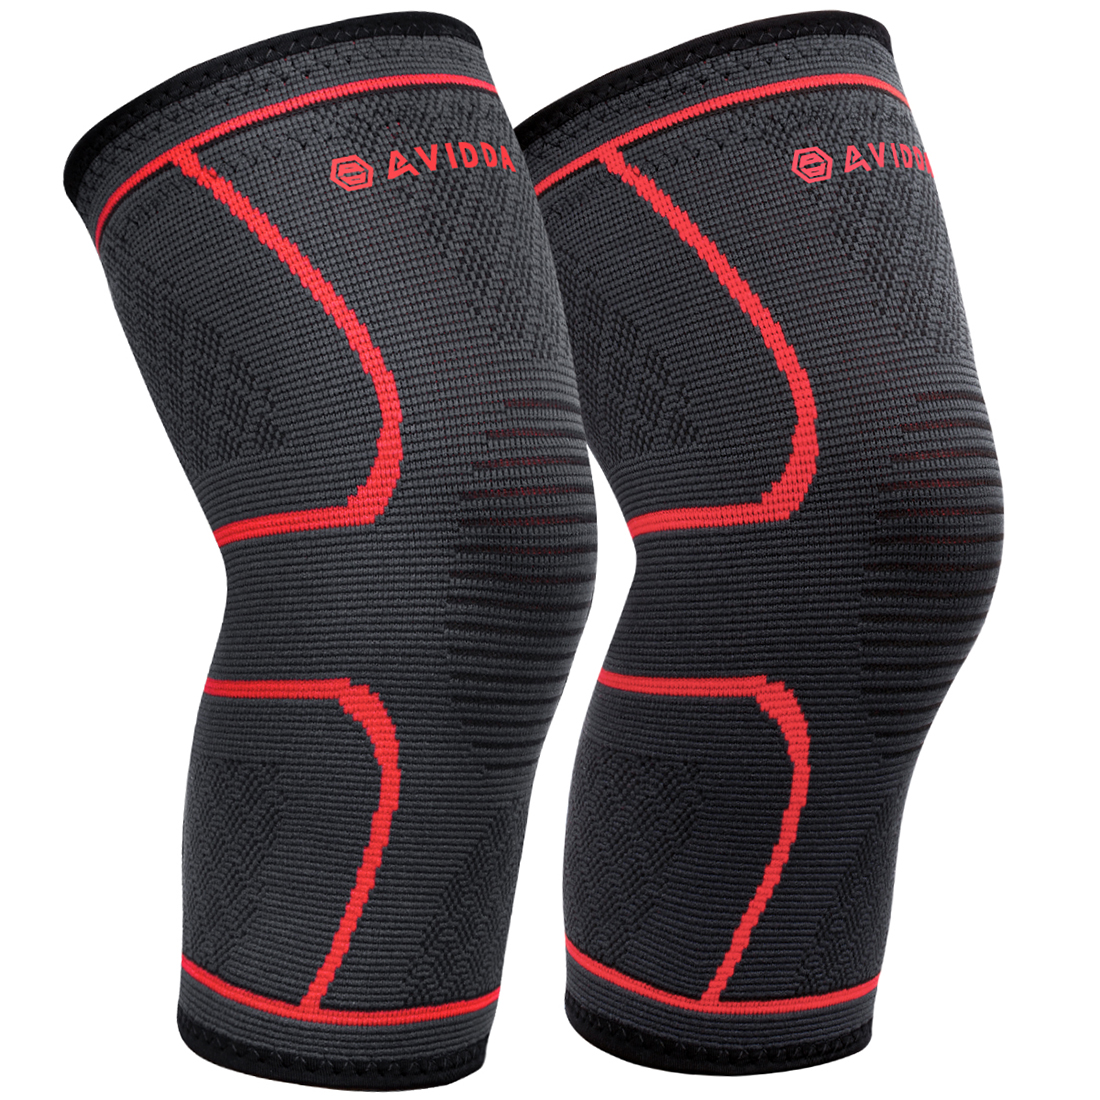 AVIDDA Knee Support Brace 2 Pack - Compression Knee Sleeves for Arthritis, Joint Pain, Ligament Injury, Meniscus Tear, ACL, MCL, Tendonitis, Running, Squats, Sports Grey Red Small